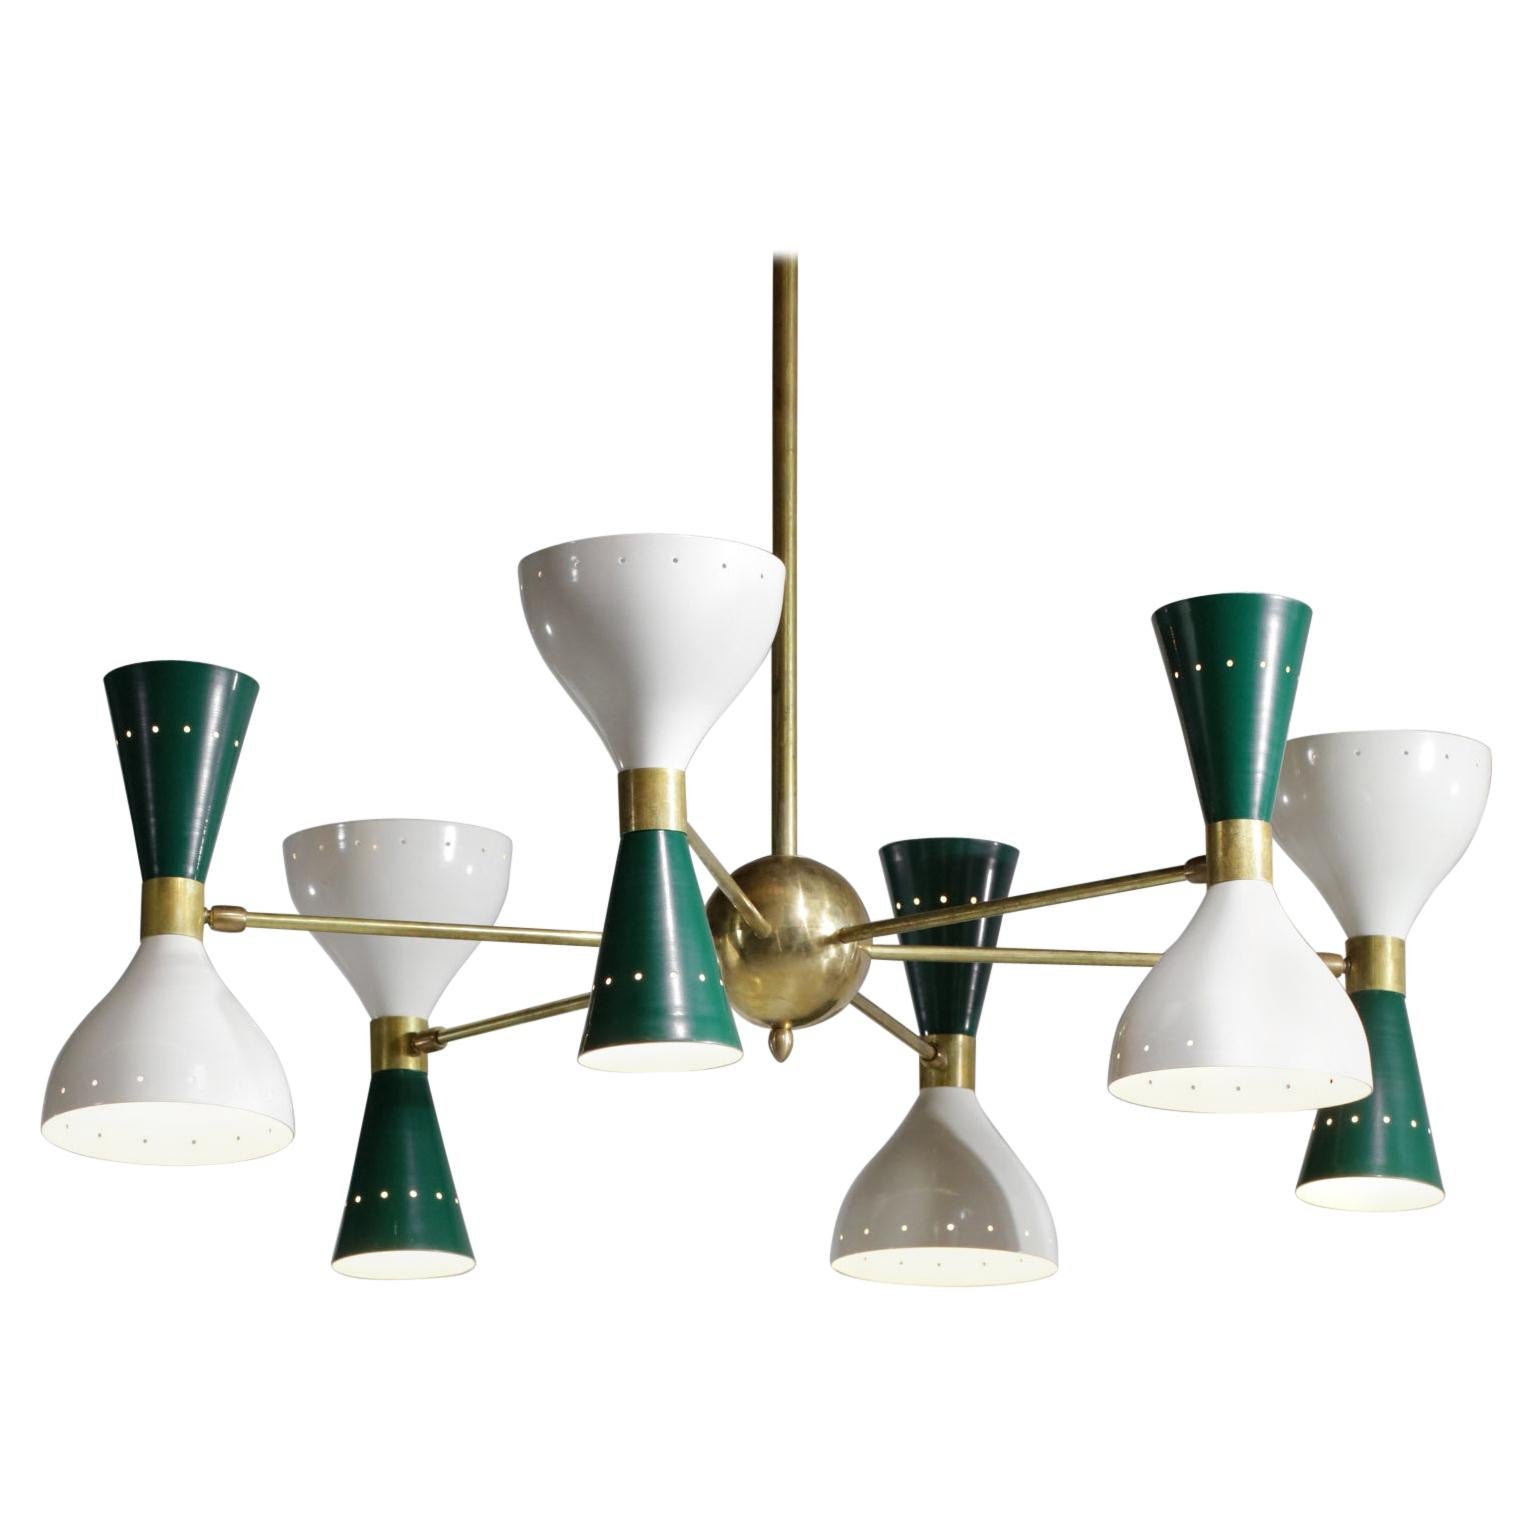 Italian Modern Chandelier "Pita" 6 Arms Green and White in Style of Stilnovo